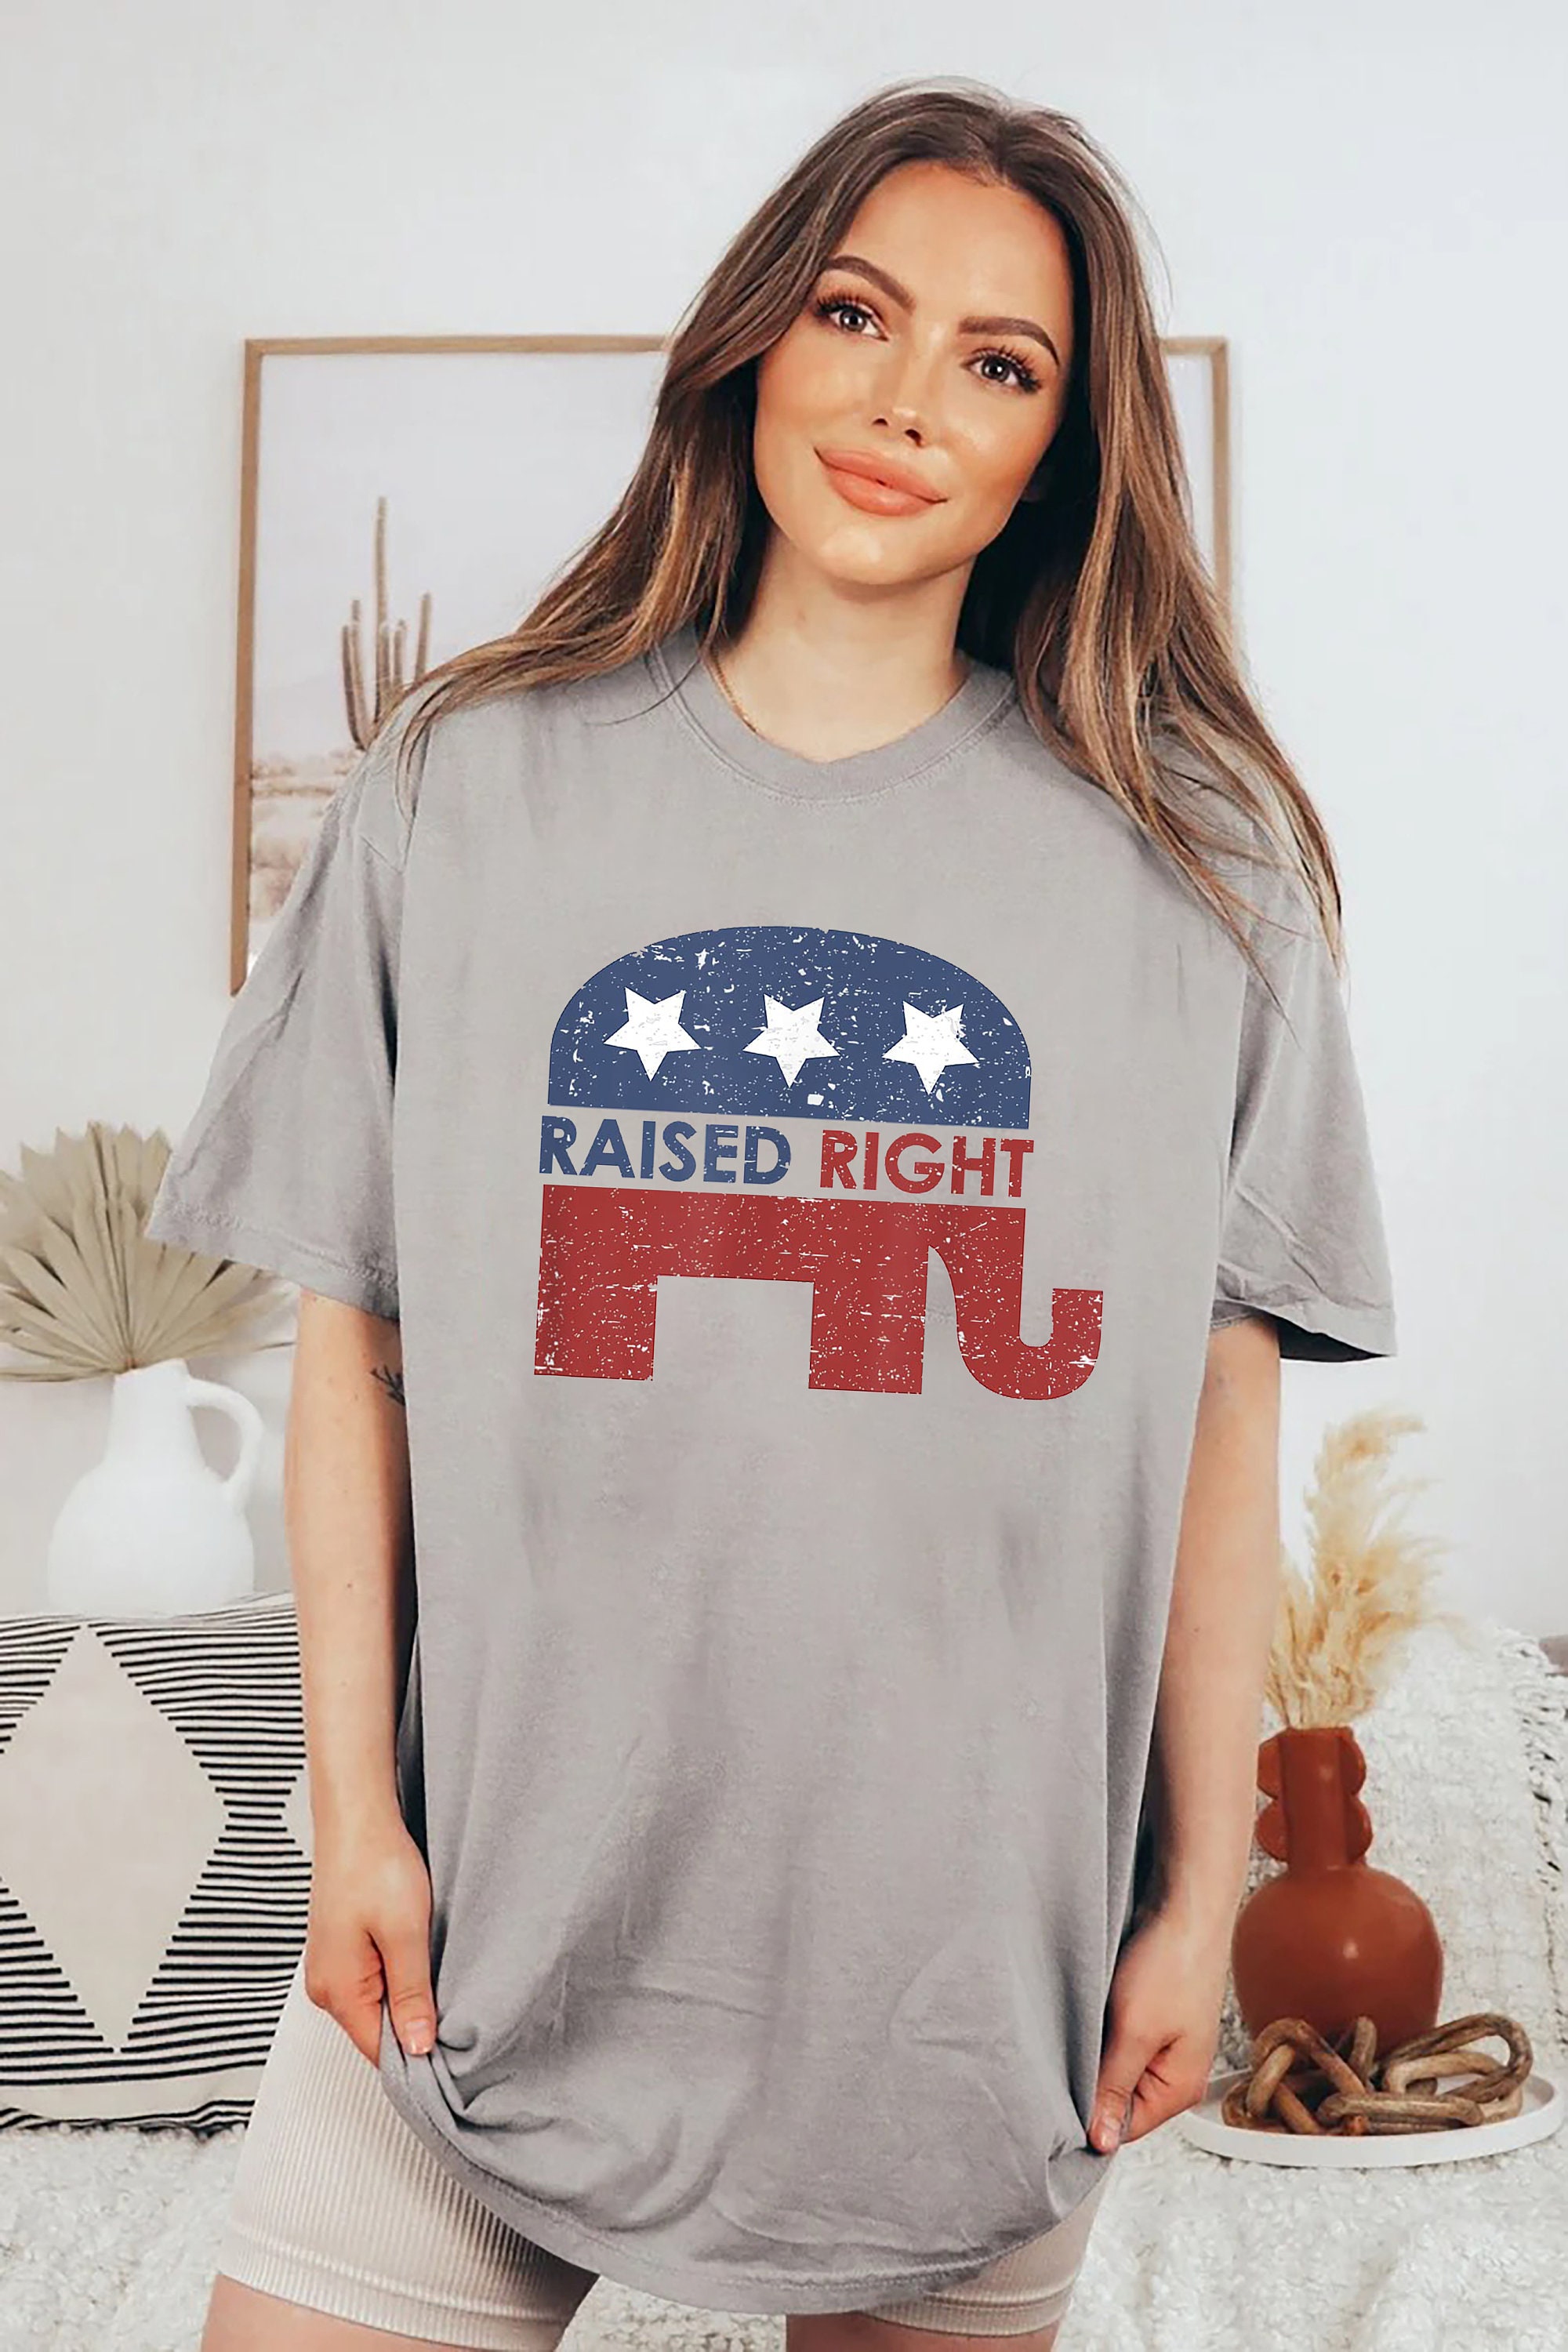 Discover Raised Right Republican Elephant Pro America Conservative Sweatshirt Republican Gifts for Conservative Woman Men Republican Sweatshirt